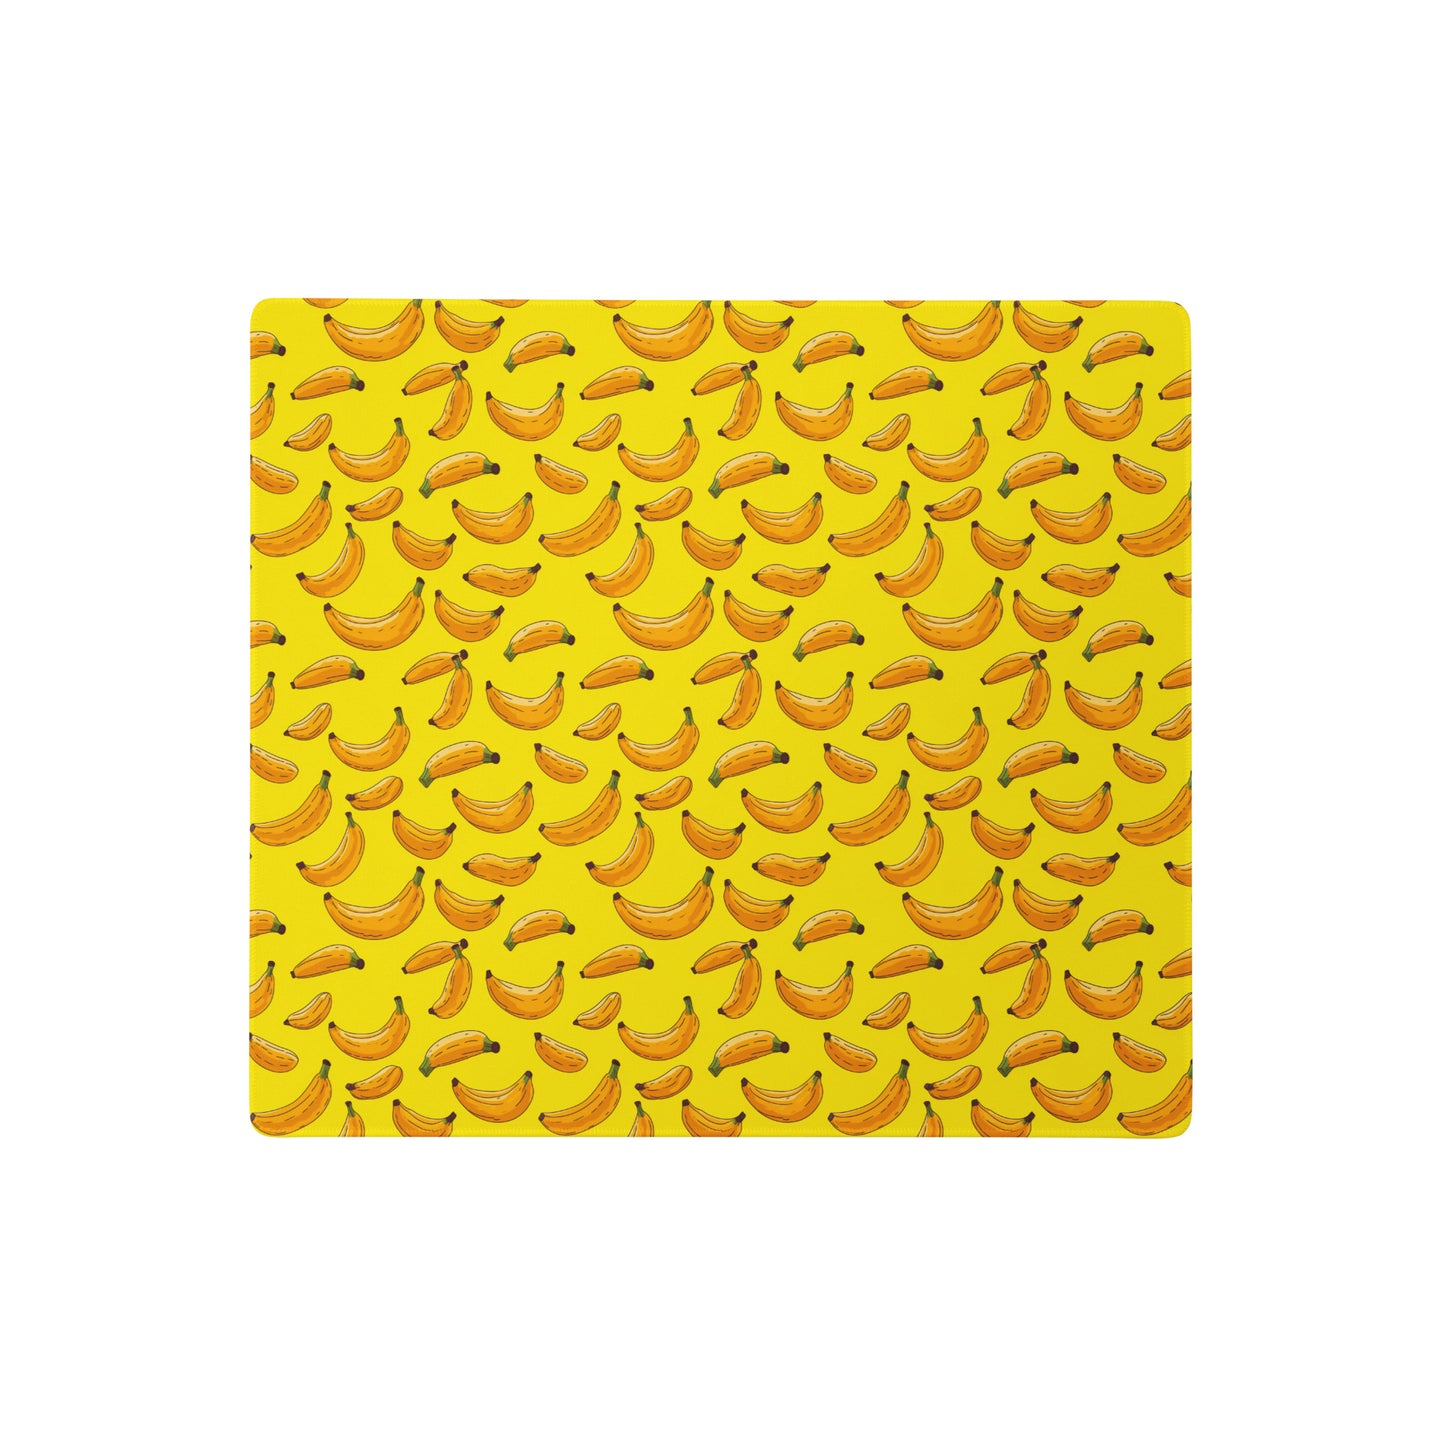 A 18 x 16" desk pad with bananas all over it. Yellow in color.